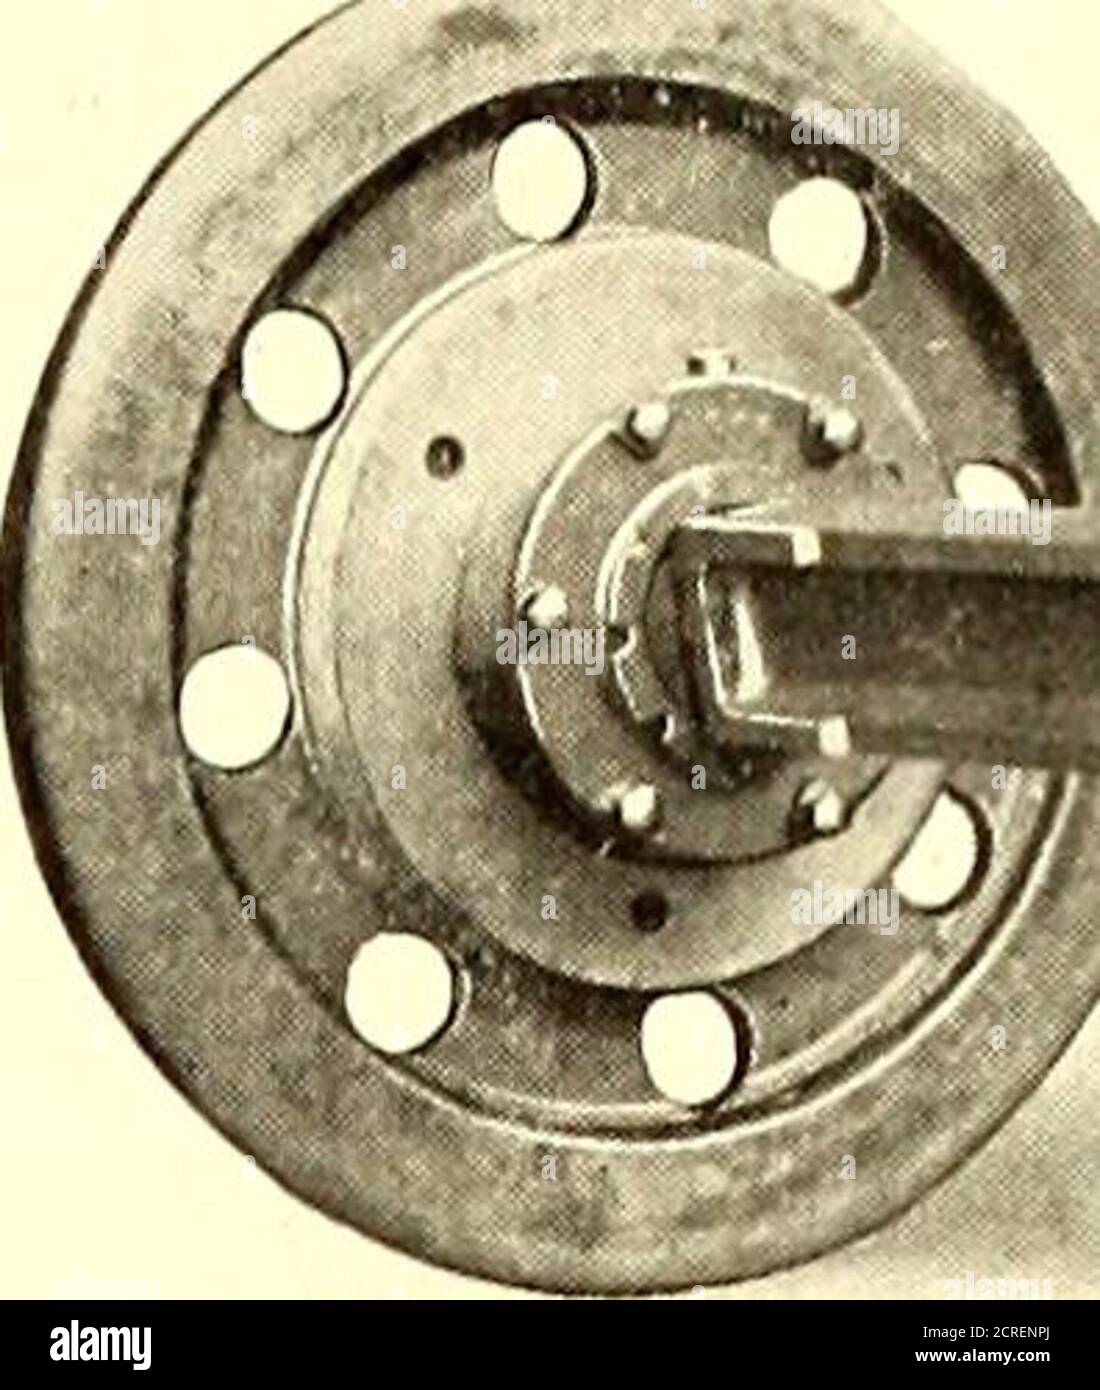 . Electric railway journal . ows a Roll-way wheel with the truck frames placed inside the wheels.This was practically the design made for the double-truckaccumulator car previously mentioned. Fig. 2 shows a formwhere the axle extends through the wheel and the truckframe rests on the axle outside the wheel. The end thrust inthis pattern is taken at opposite ends of the journal sleeve,while in the first design the end thrust is taken in both direc-tions at the outer end of the journal. Fig. 3 shows the Roll-way wheel hub with a seat for the gear at the inner end andprovision for a rolled steel w Stock Photo